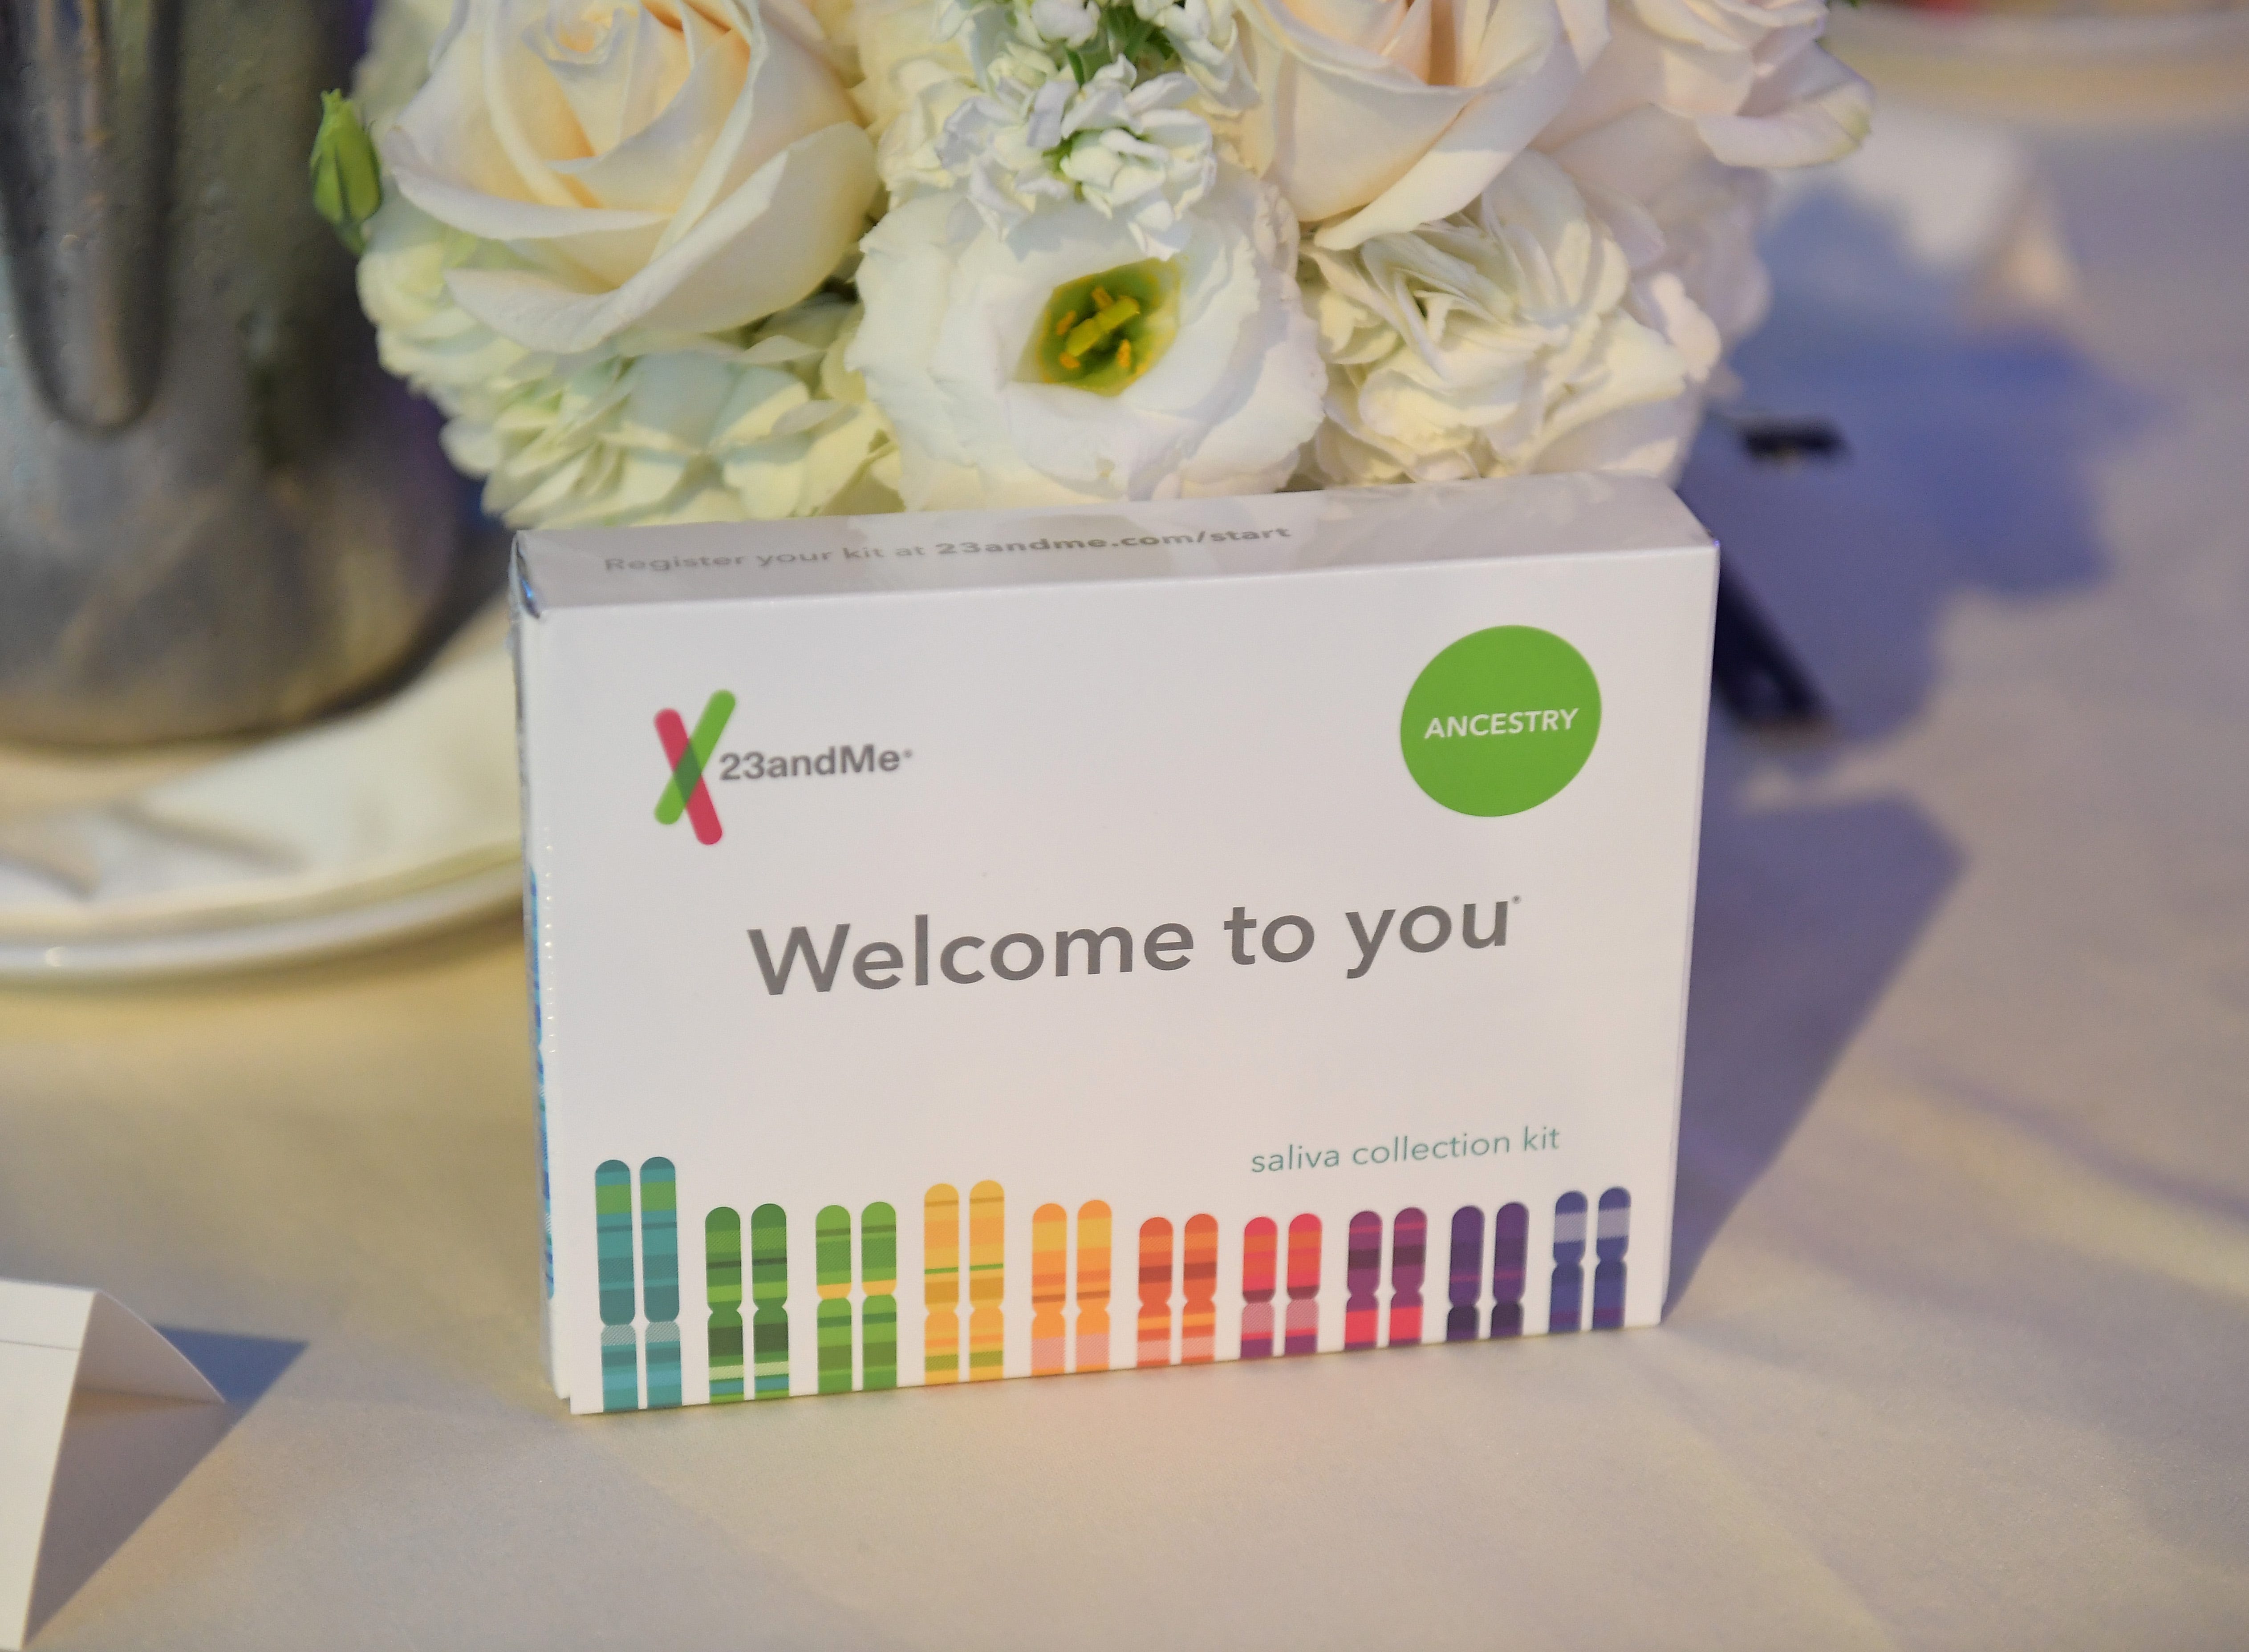 Dna testing for weight loss